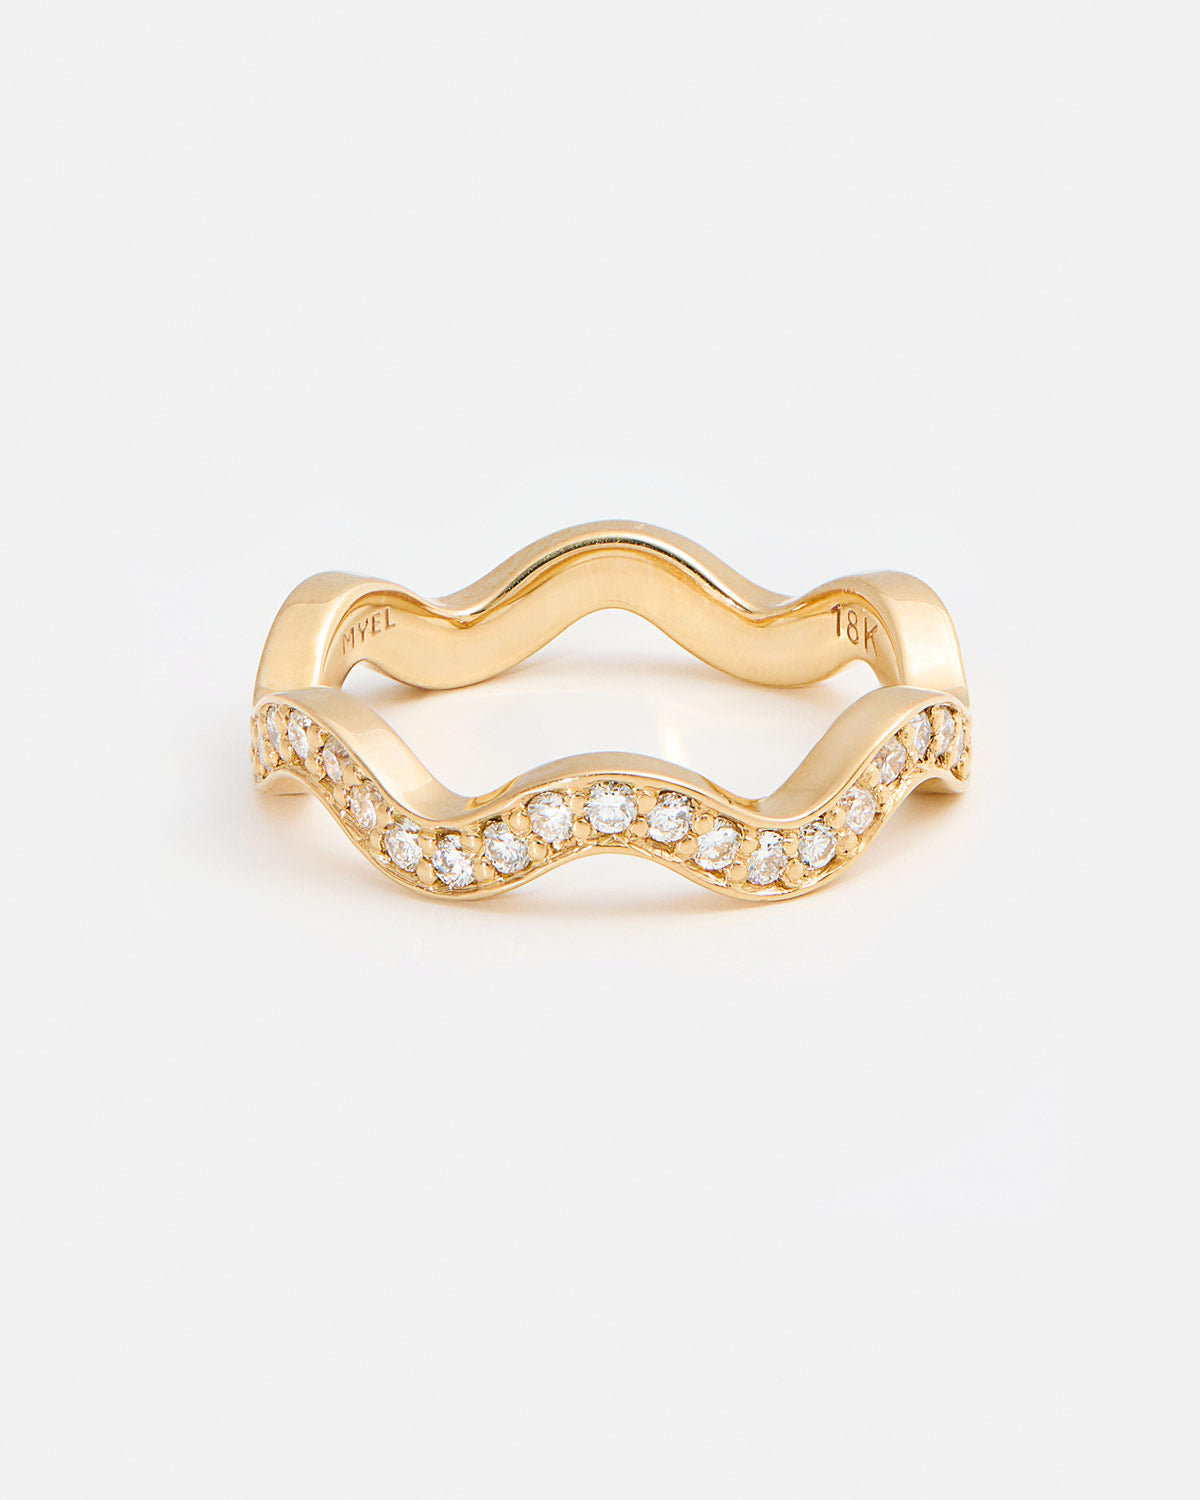 Ruffle Ring in 18K Fairmined Gold with Lab-Grown Diamonds